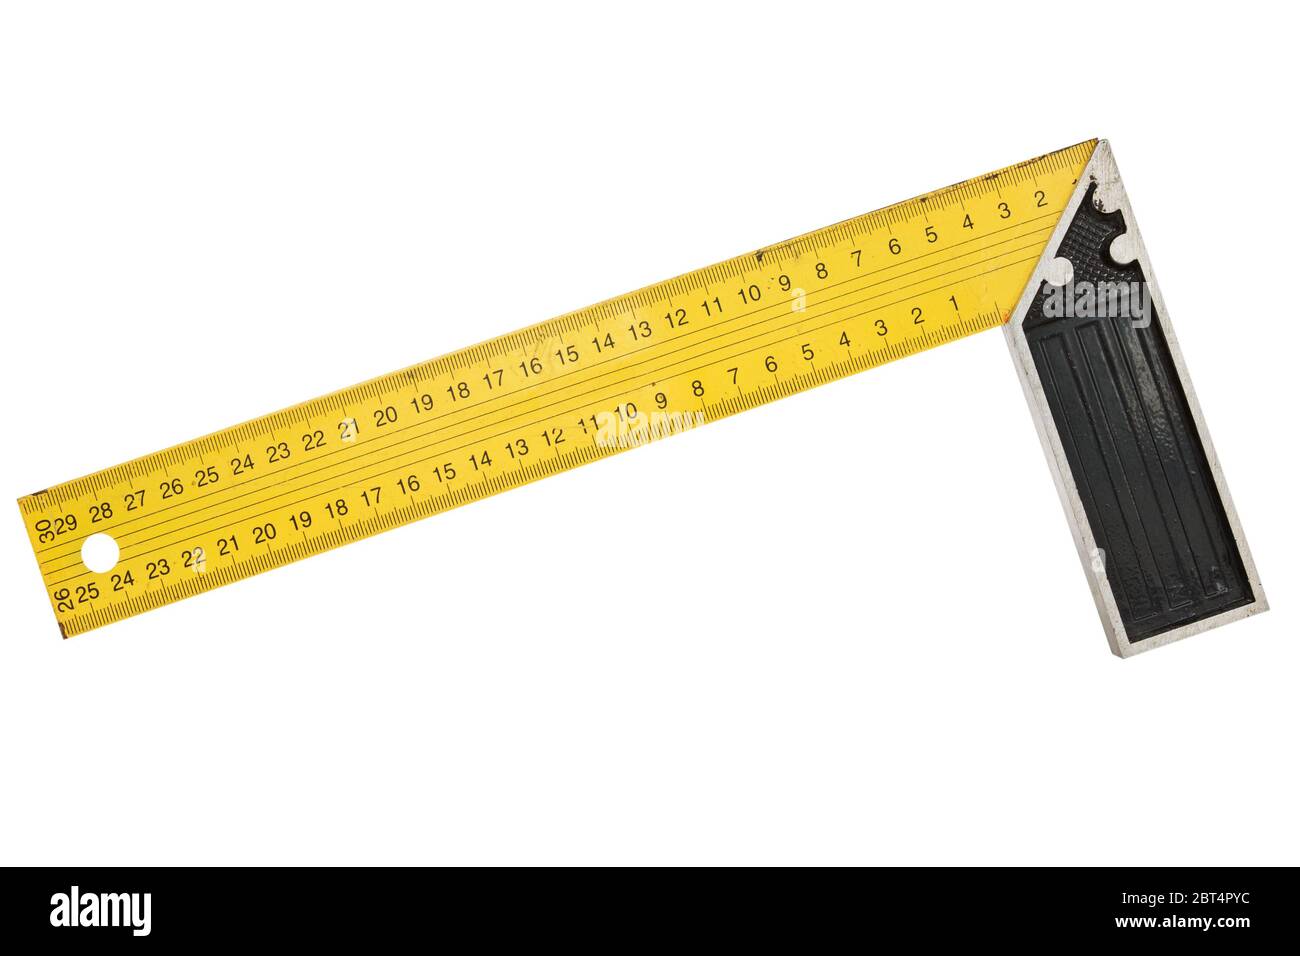 Measurement Tool, Multi-Angle Layout Tools Template Tool Ruler for Builders/Handymen/Crafts/Carpenter Yellow 25cm, Size: 25 cm